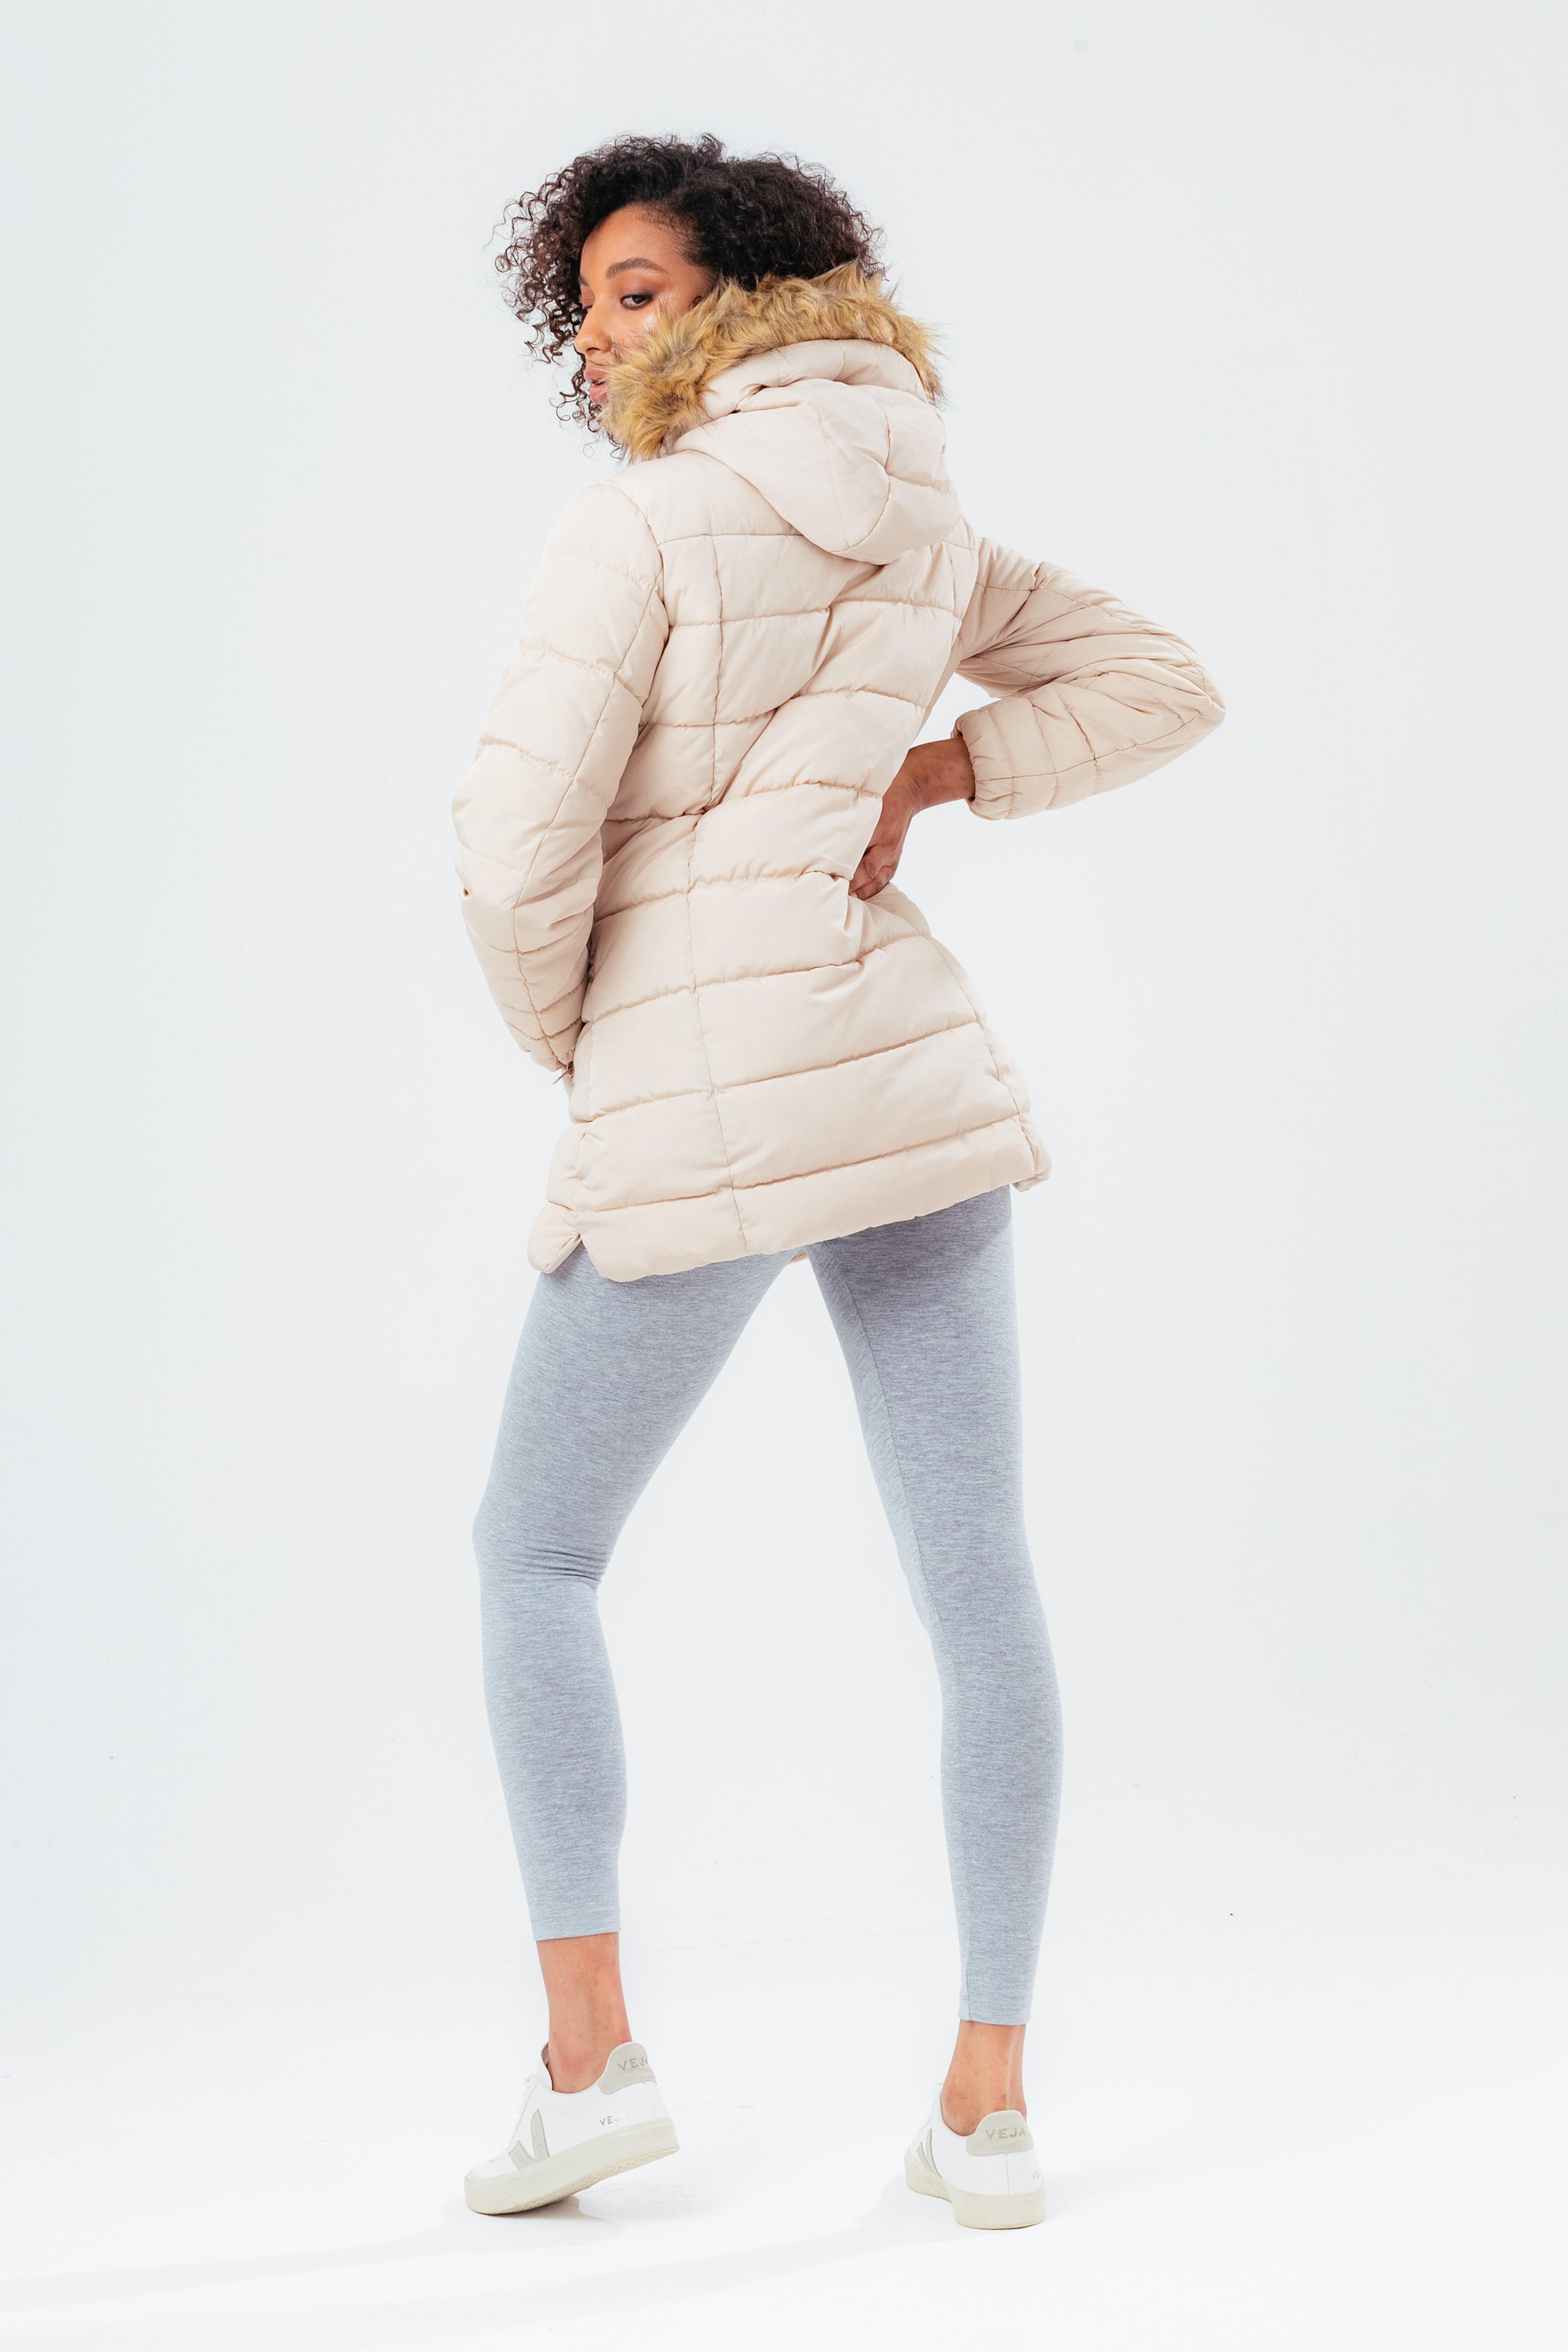 Alternate View 2 of HYPE BEIGE MID LENGTH WOMEN'S PADDED COAT WITH FUR